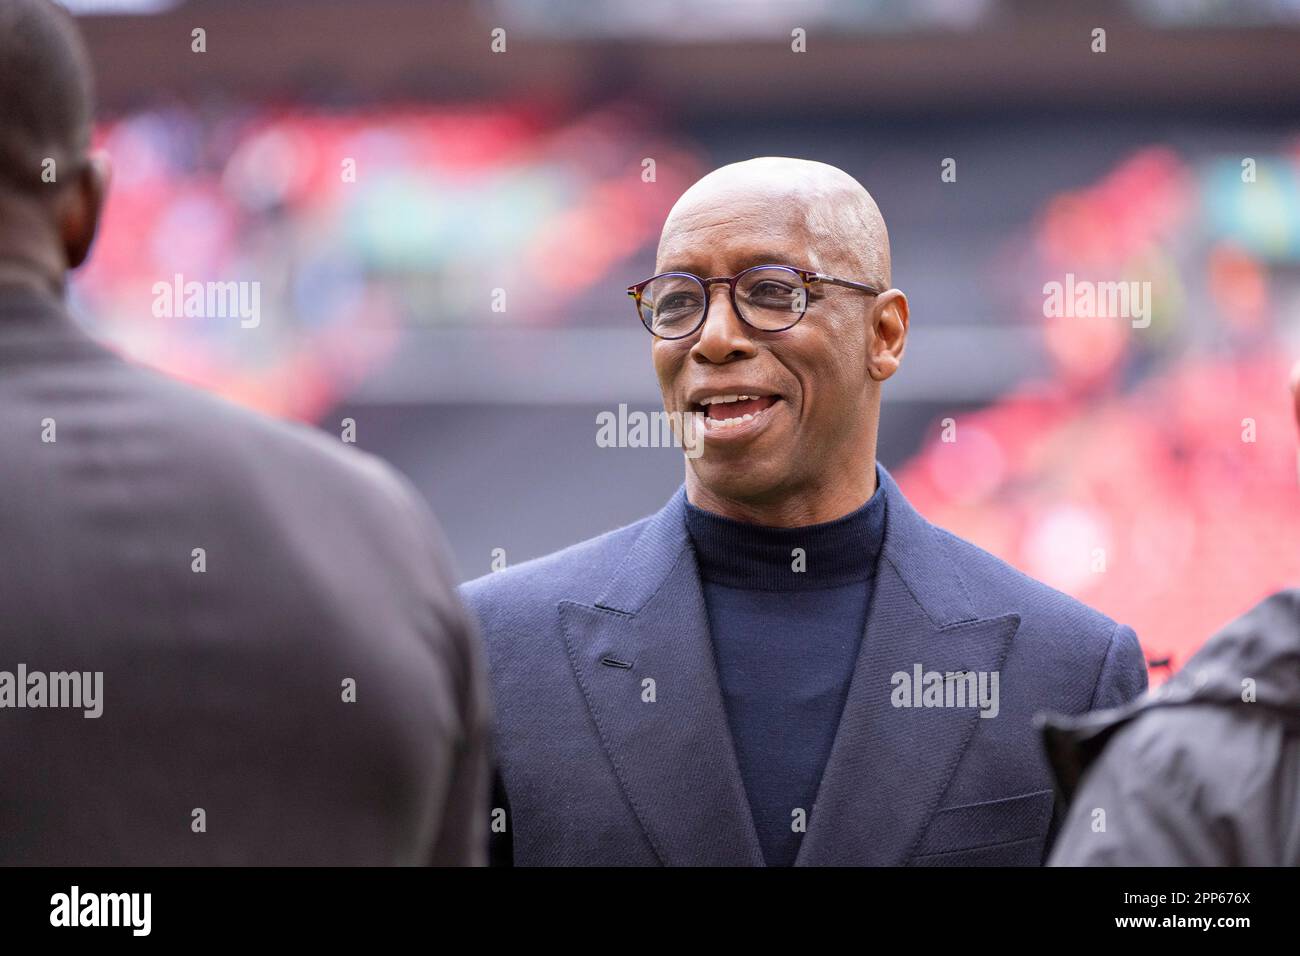 Former Arsenal striker Ian Wright before the FA Cup Semi Final football match between Manchester City and Sheffield United at Wembley Stadium in London, England. (Richard Callis/Sports Press Photo/SPP) Credit: SPP Sport Press Photo. /Alamy Live News Stock Photo